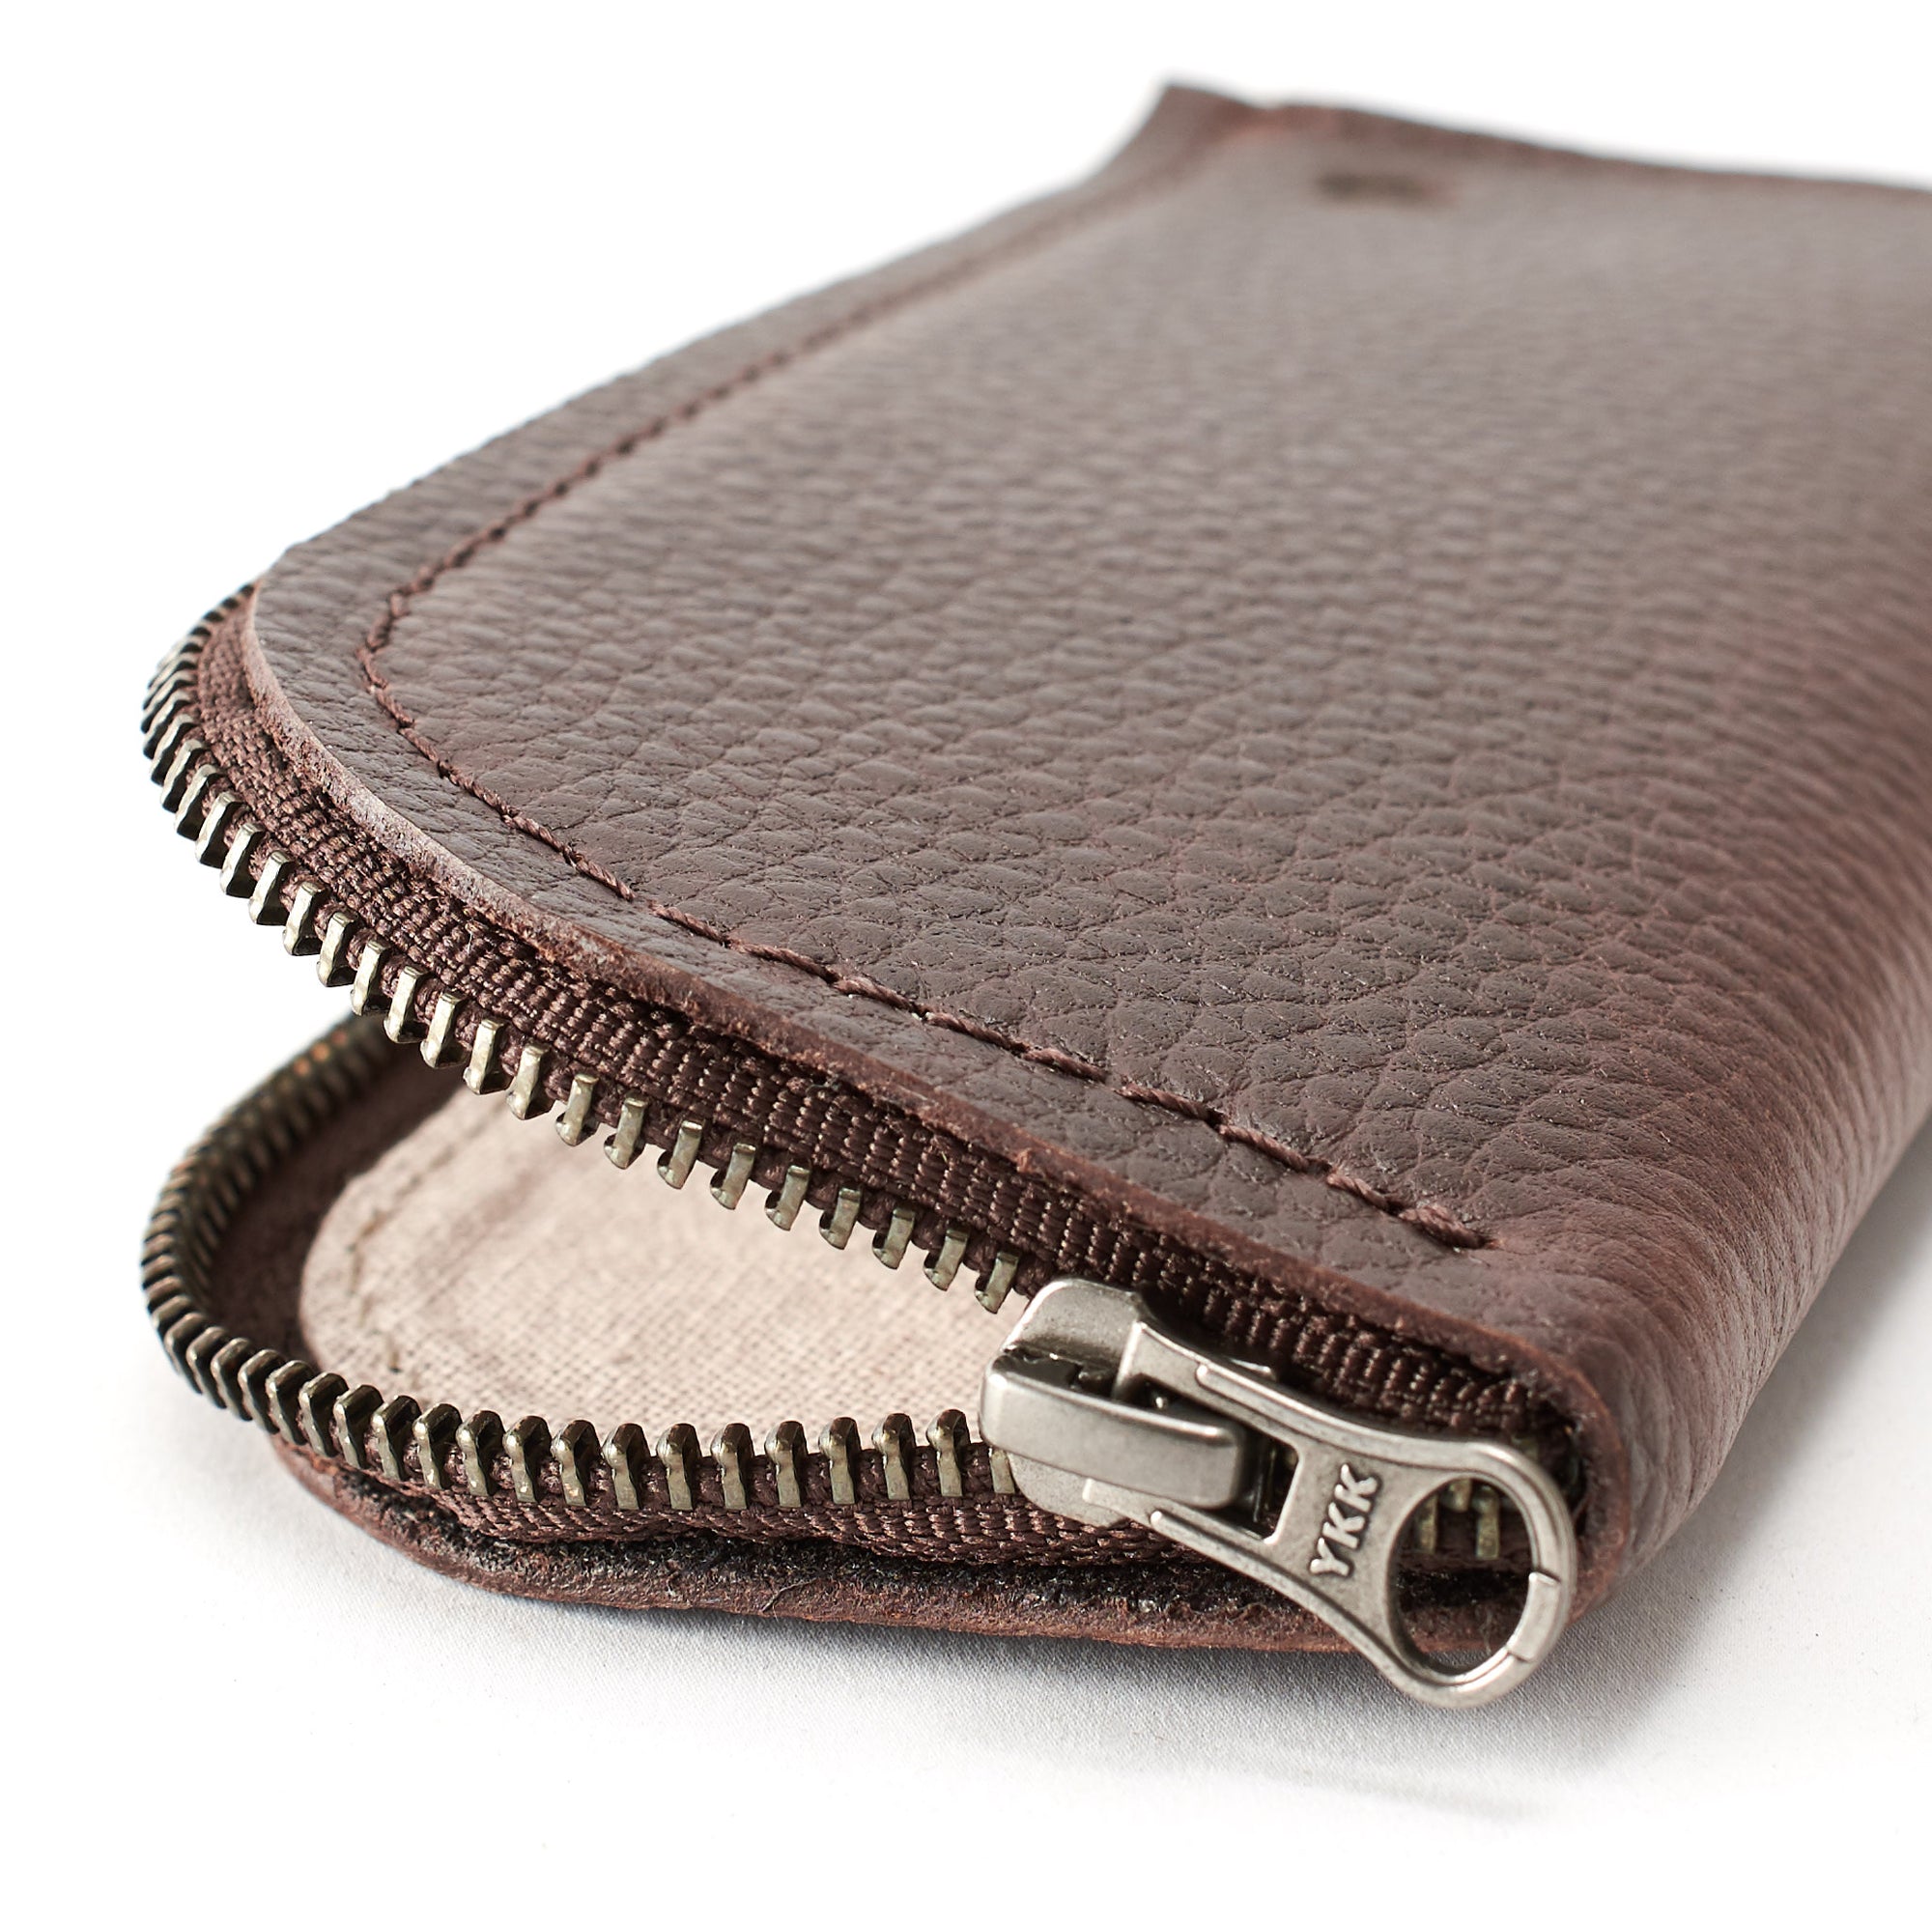 YKK metallic zippers. Dark brown leather Glasses case, sunglasses case, hand stitched leather sleeve for reading glasses